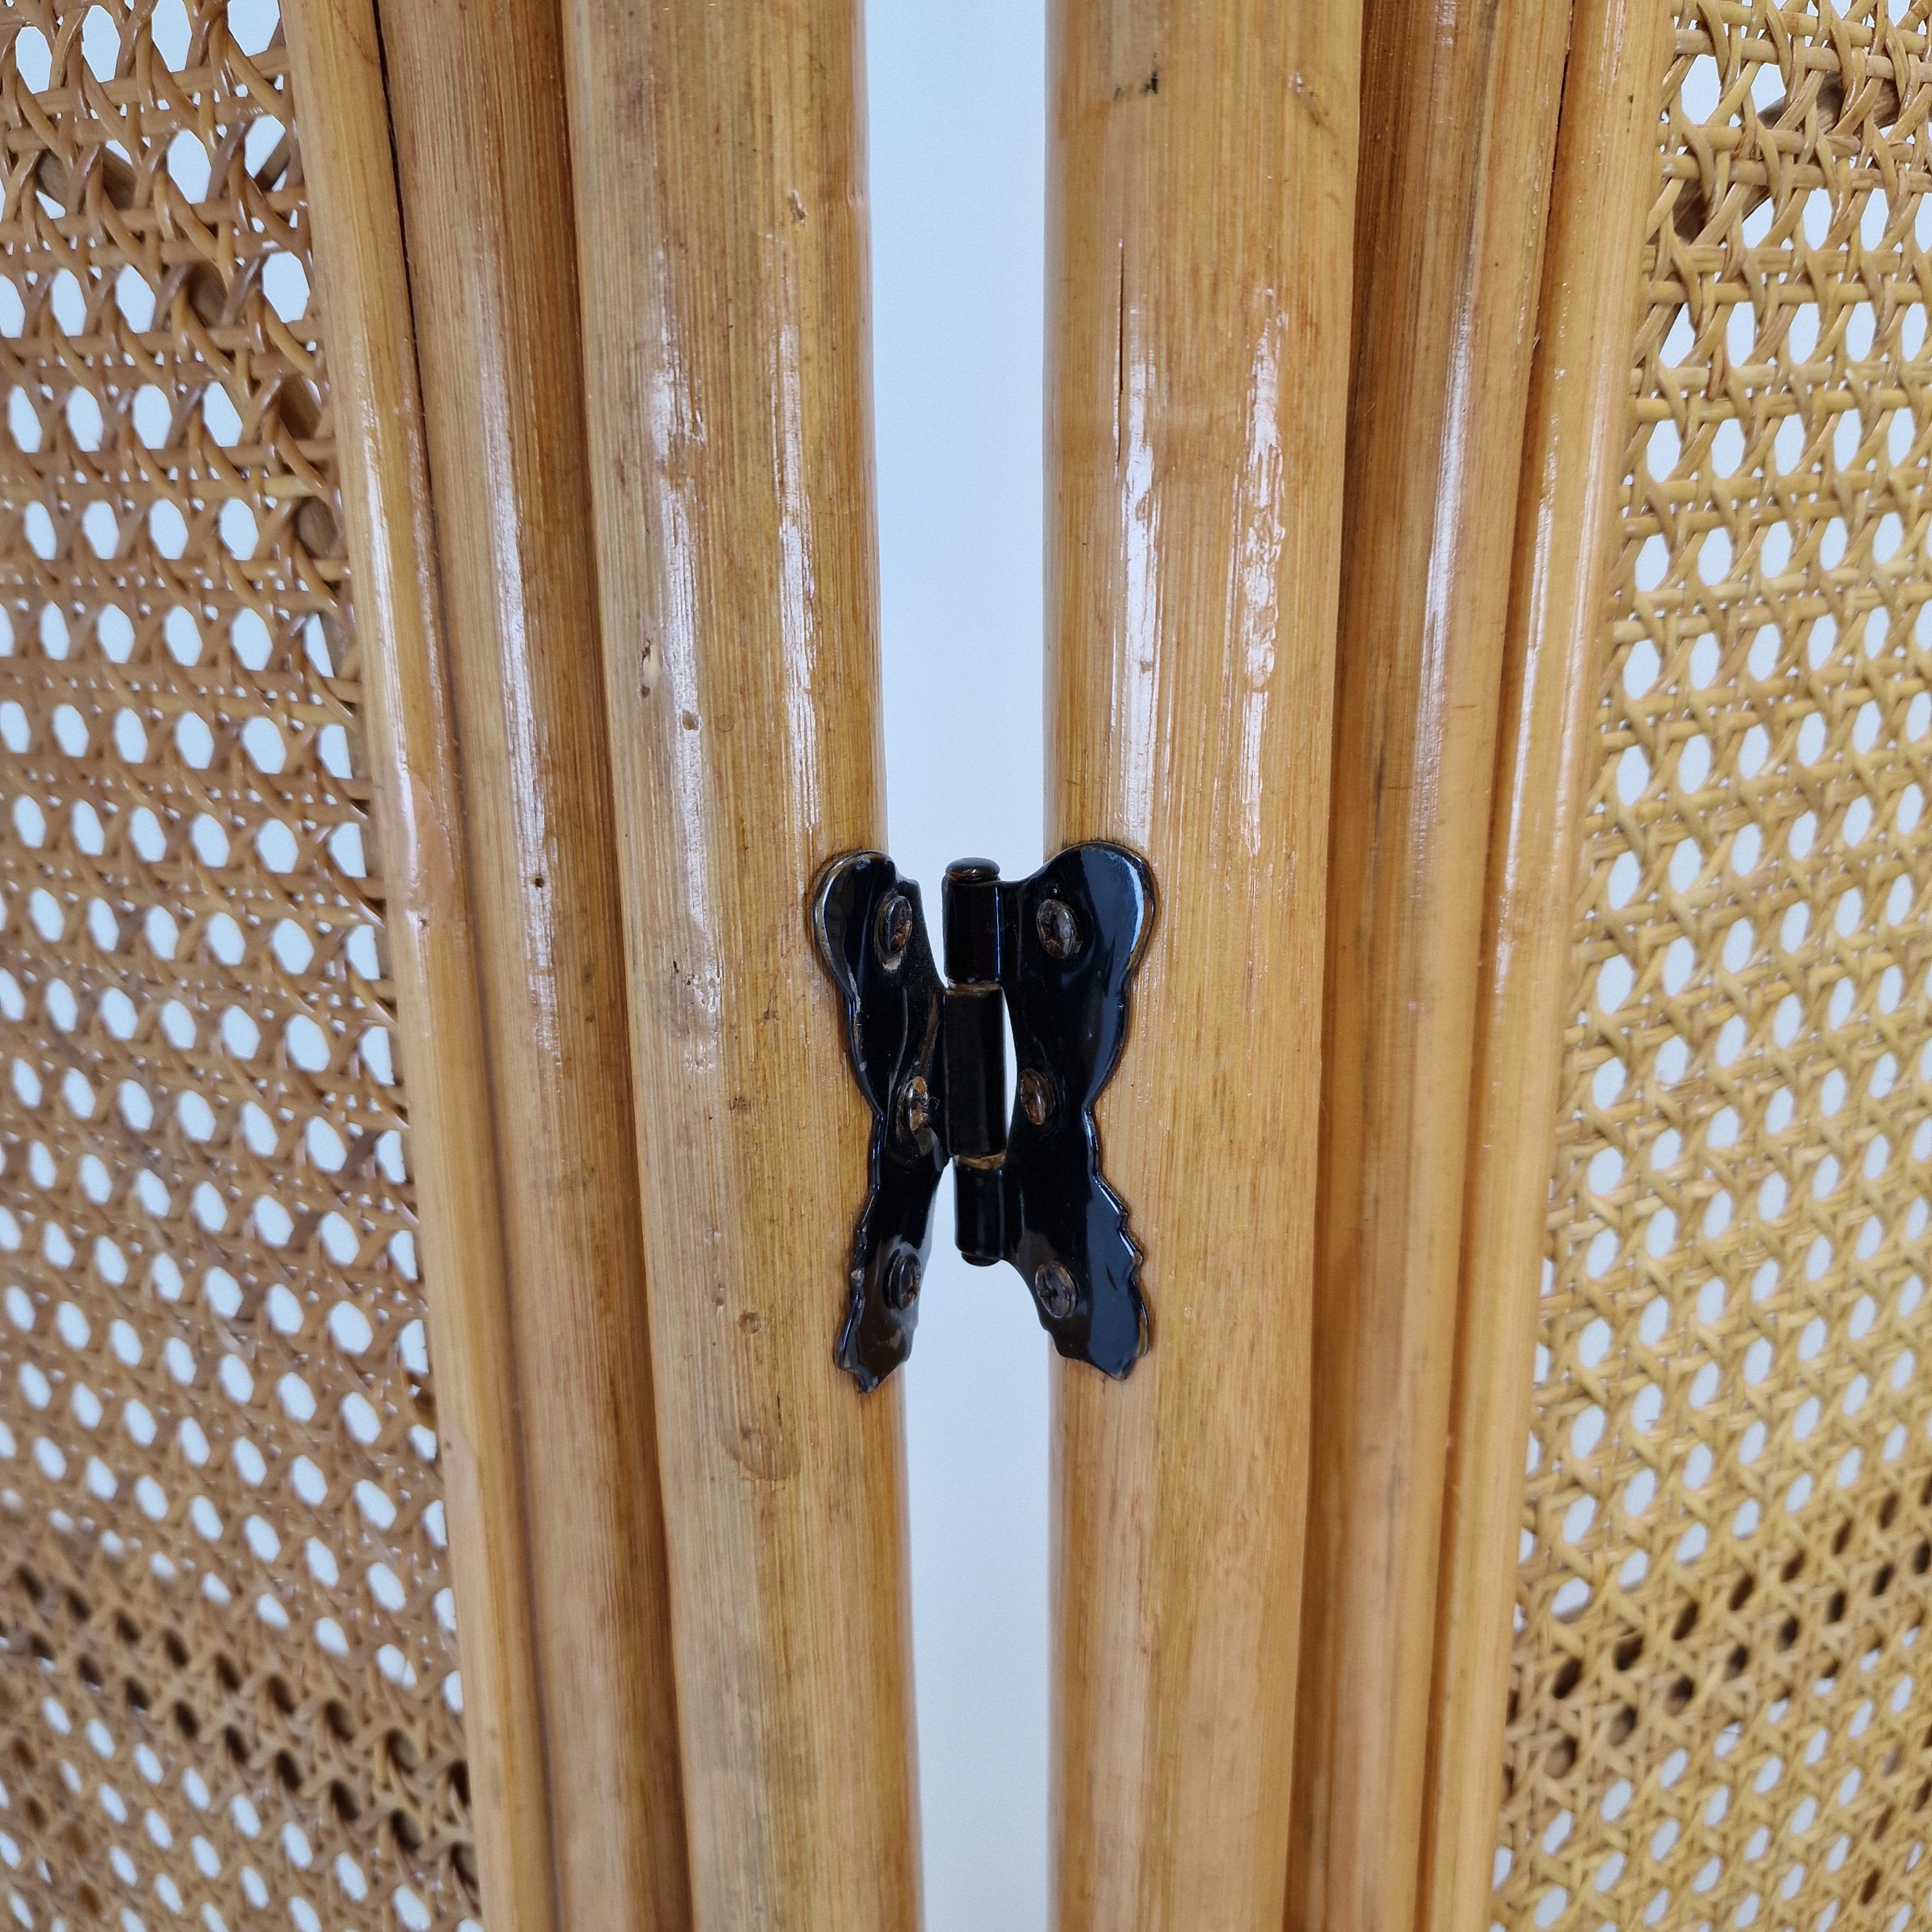 Mid-20th Century Italian Room Divider in Rattan and Wicker, 1960s For Sale